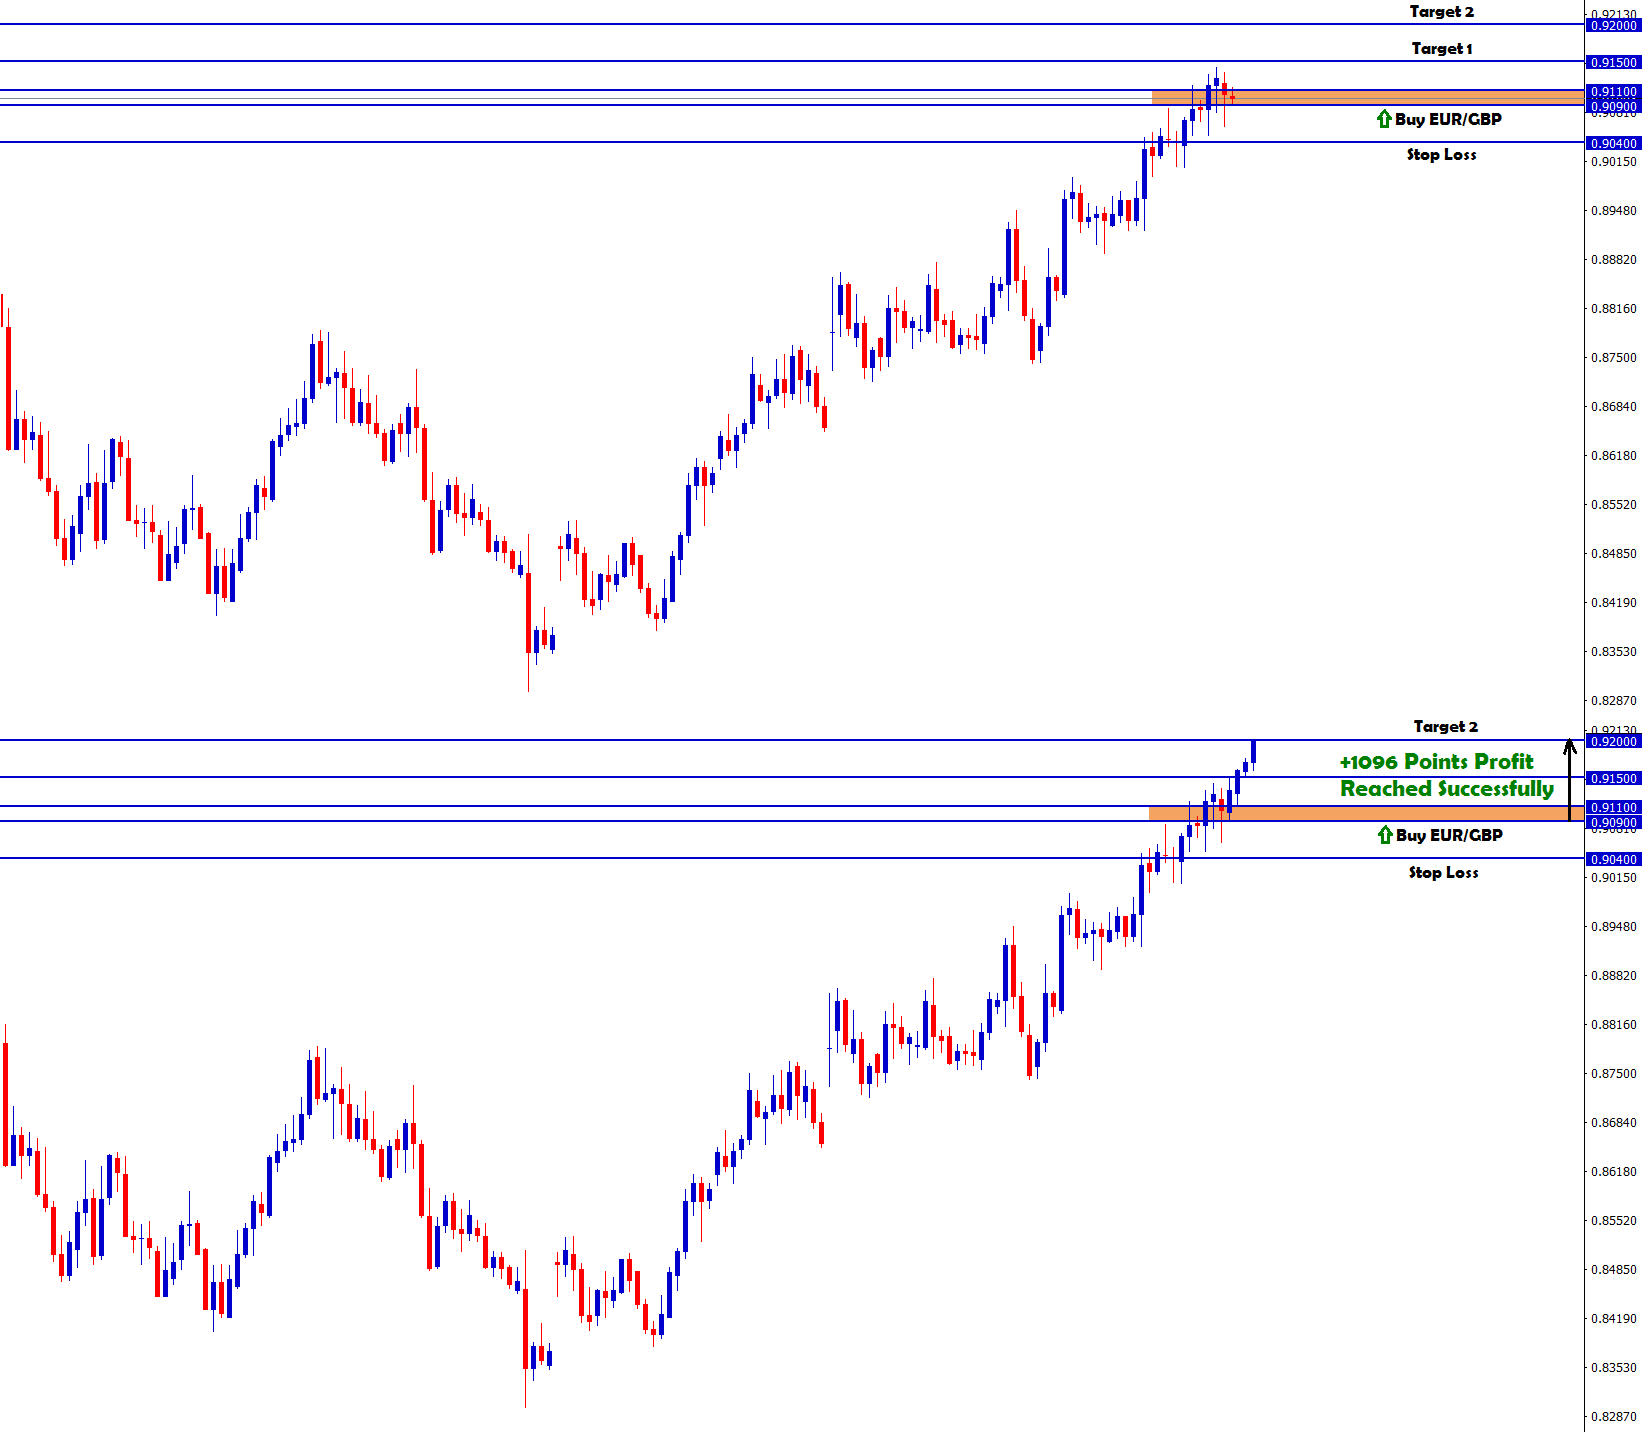 EURGBP trend continuation trading signal